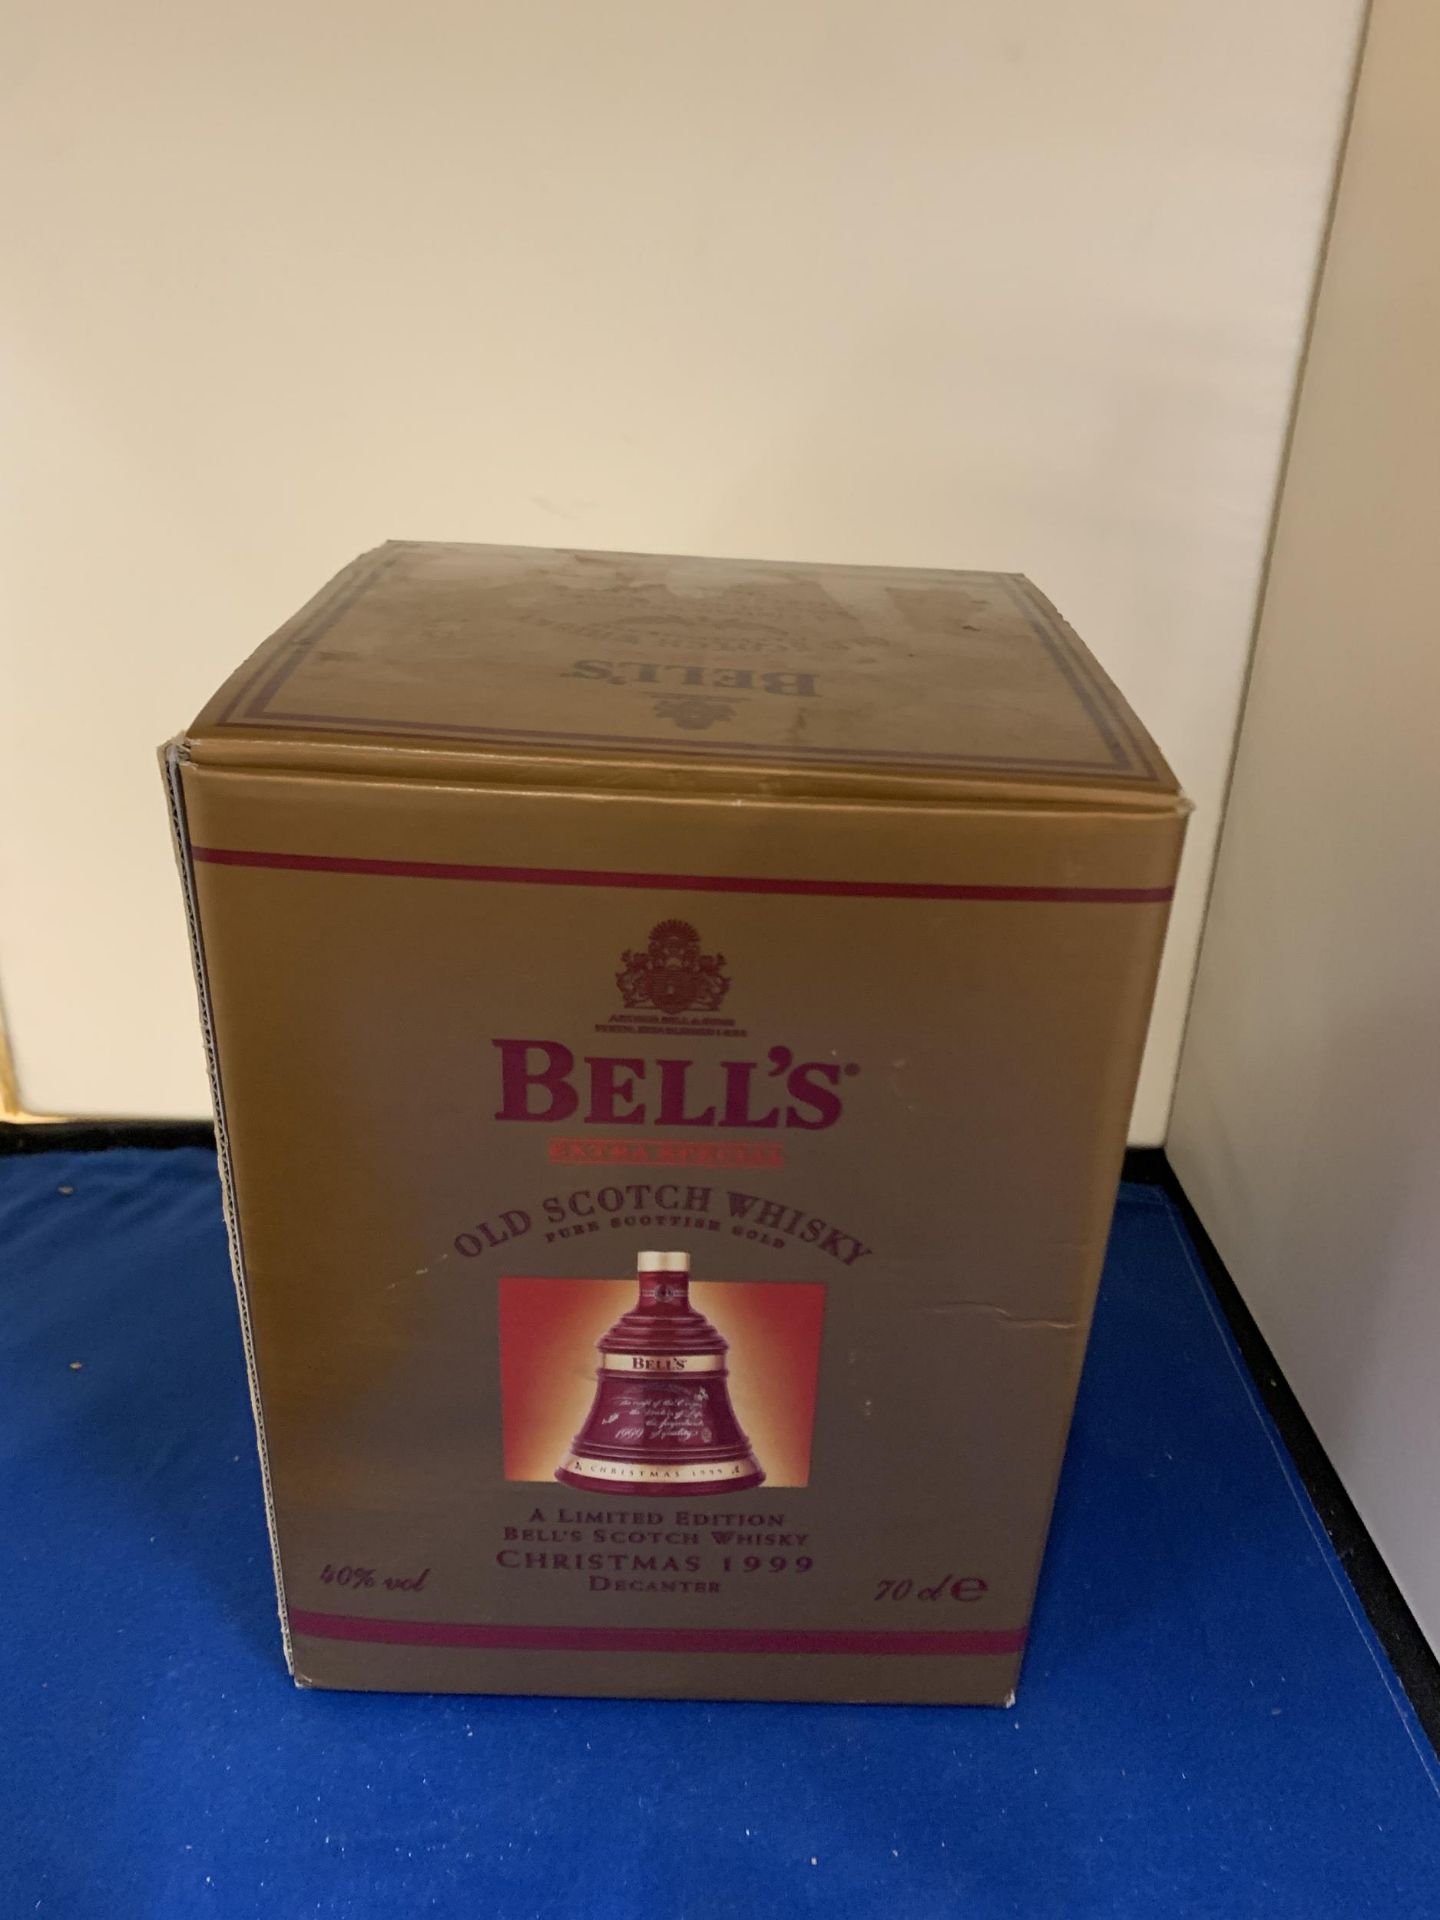 A BOXED 70CL BOTTLE - BELLS LIMITED EDITION CHRISTMAS 1999 OLD SCOTCH WHISKY DECANTER - Image 3 of 3